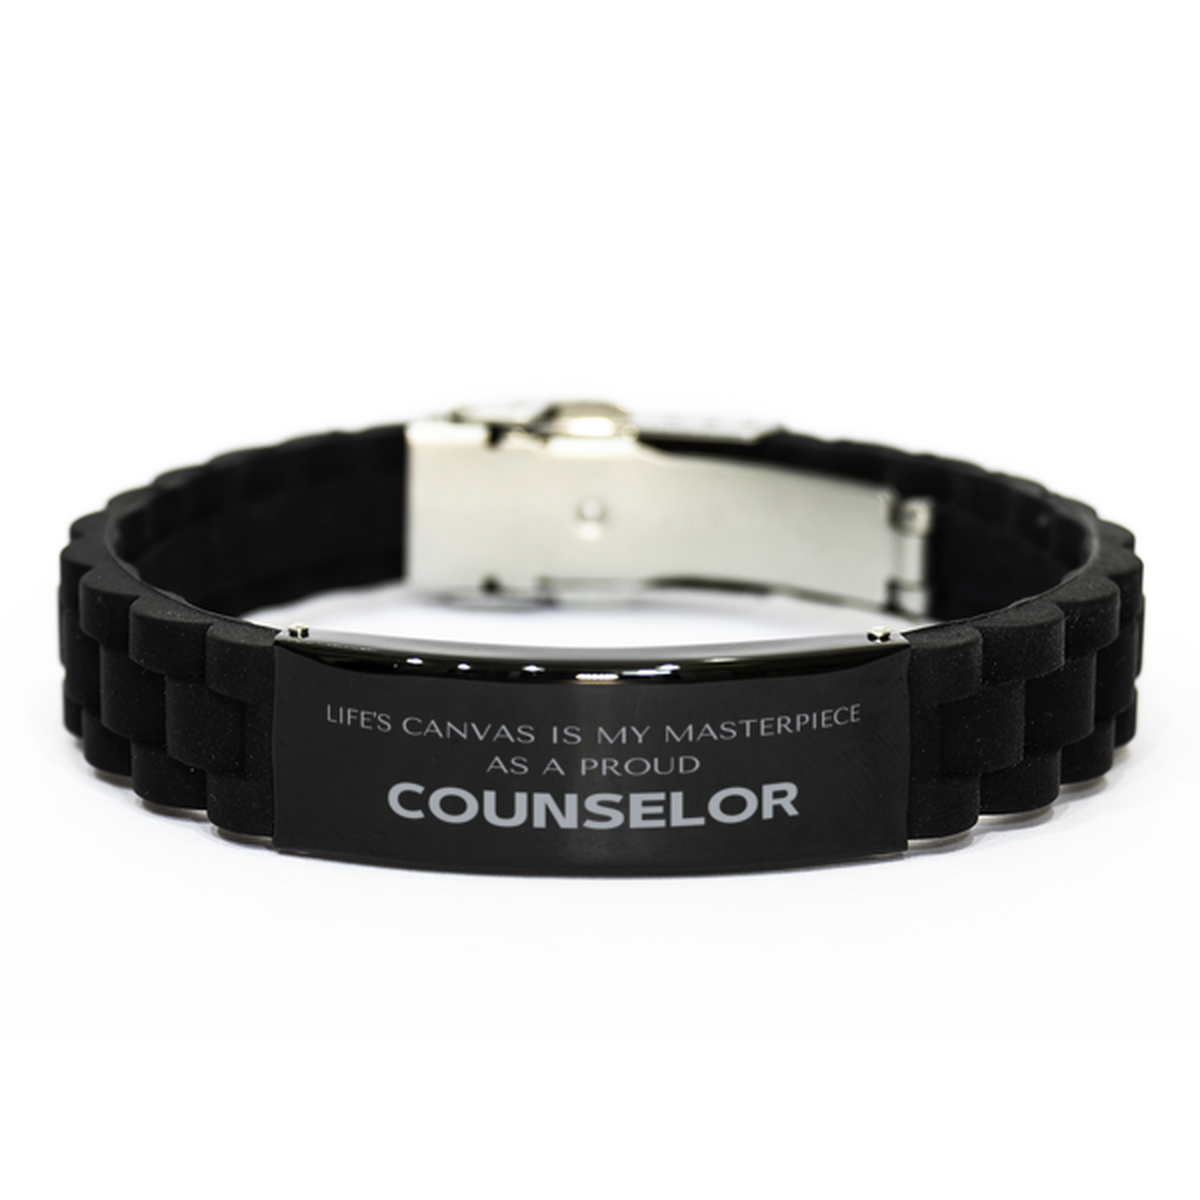 Proud Counselor Gifts, Life's canvas is my masterpiece, Epic Birthday Christmas Unique Black Glidelock Clasp Bracelet For Counselor, Coworkers, Men, Women, Friends